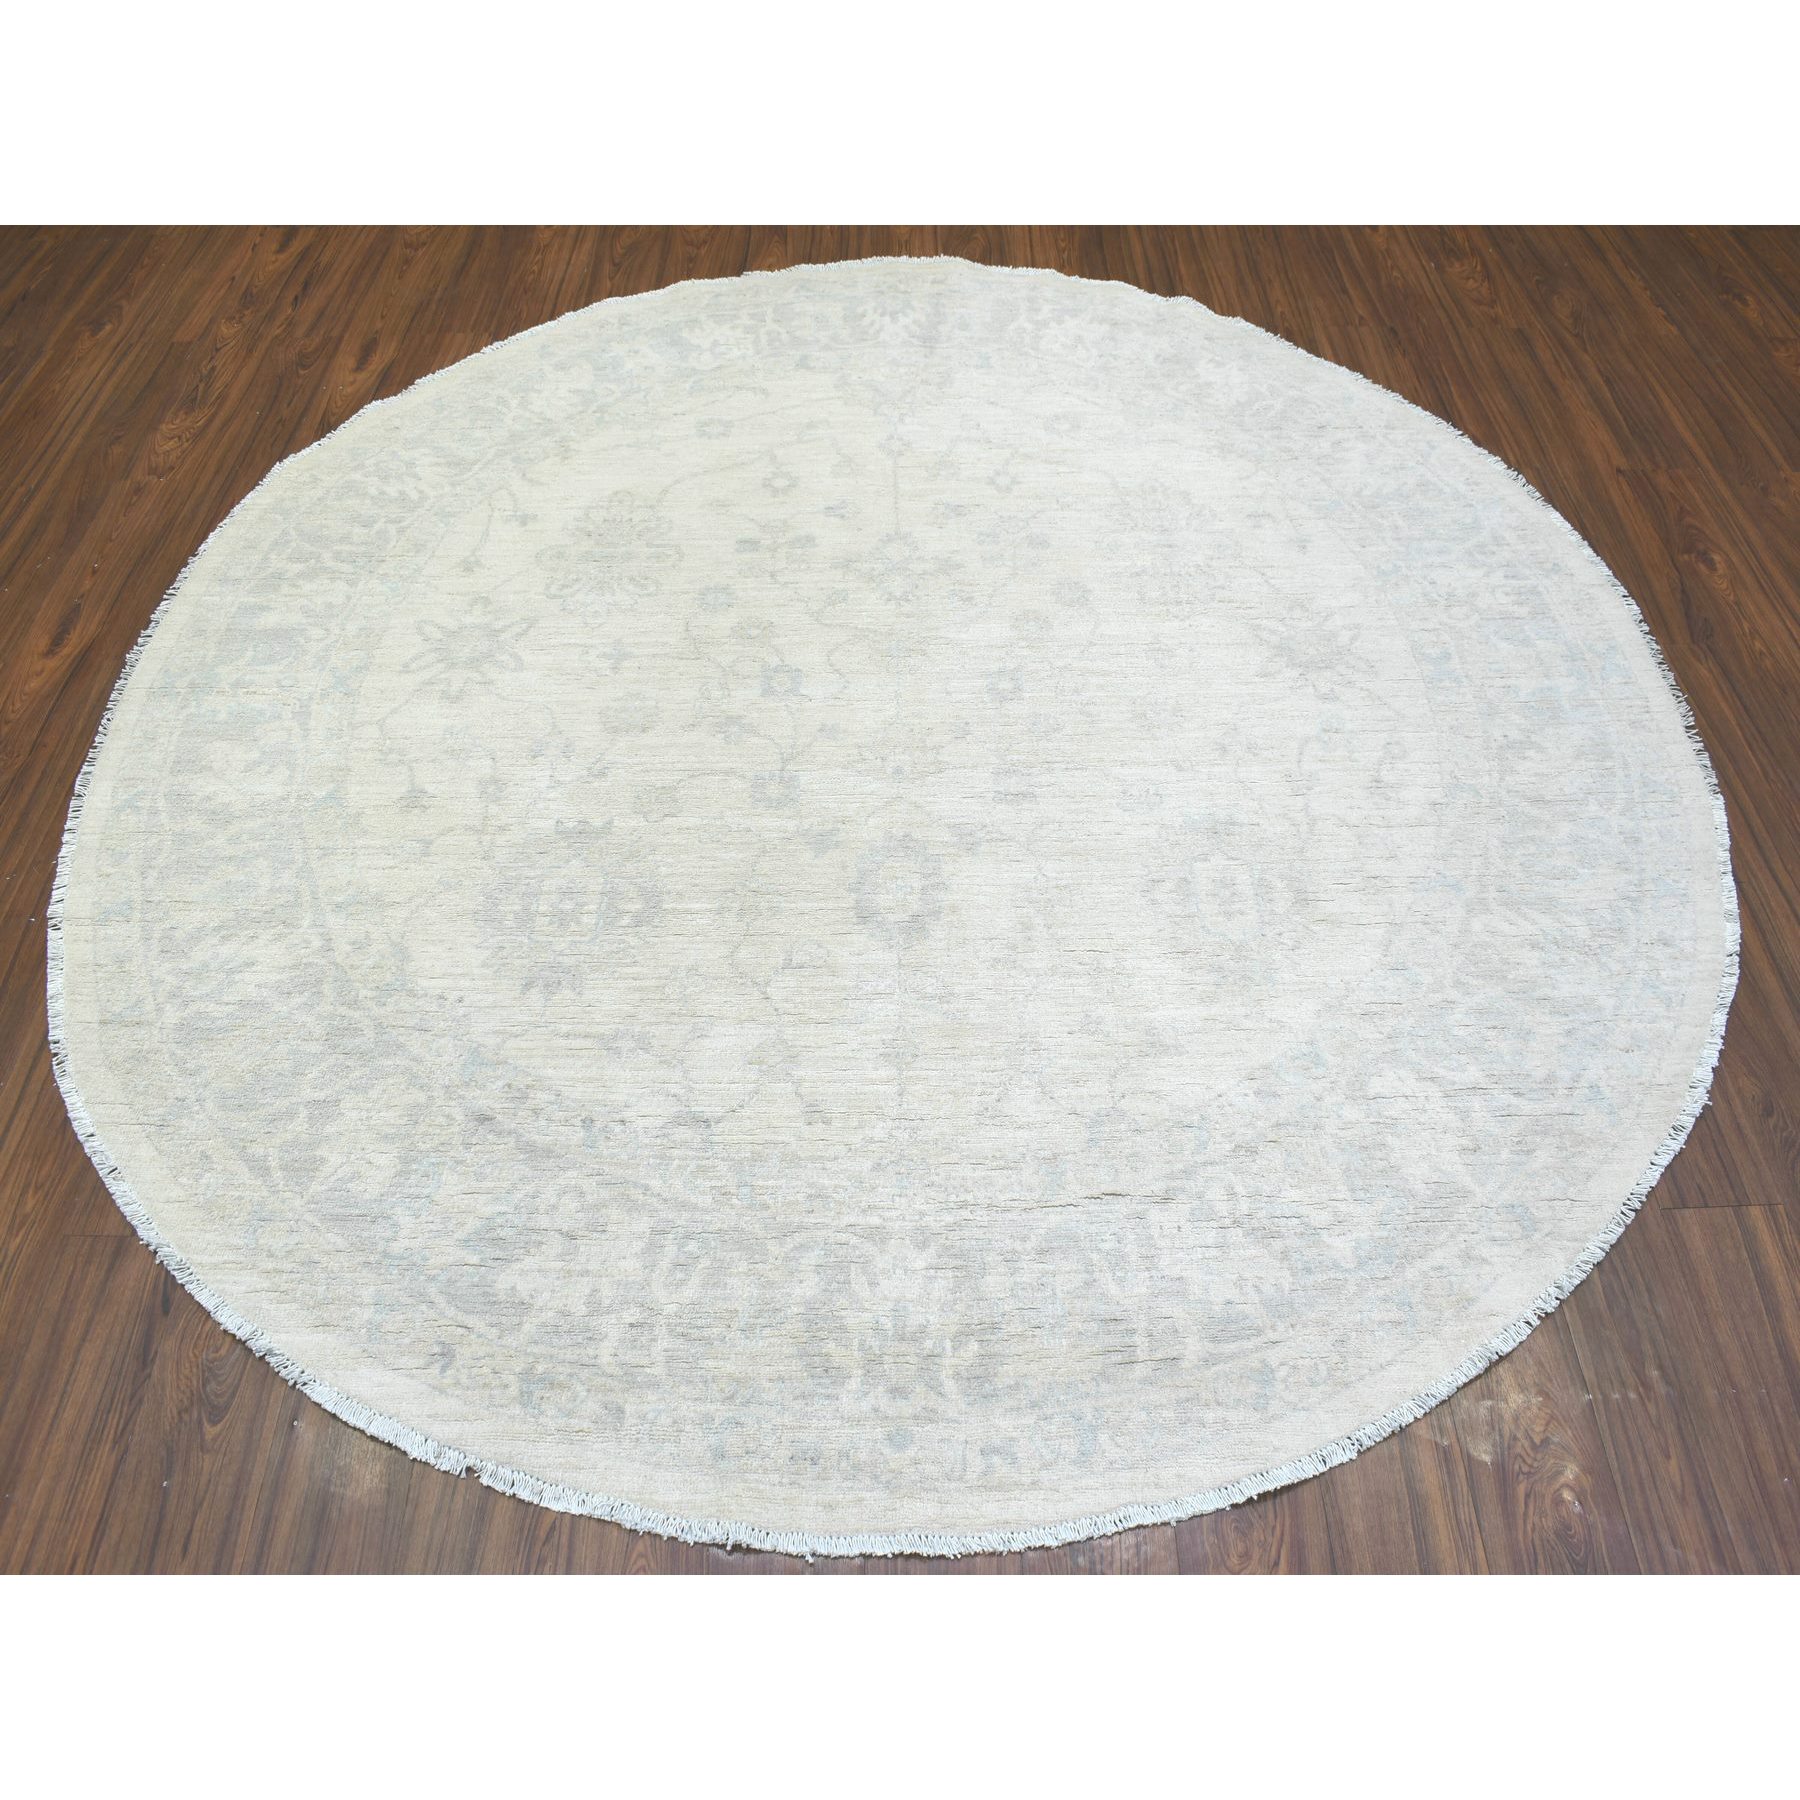 7'9"x7'9" Ivory, Pure Wool Hand Woven, White Wash Peshawar with All Over Leaf Design Natural Dyes, Round Oriental Rug 